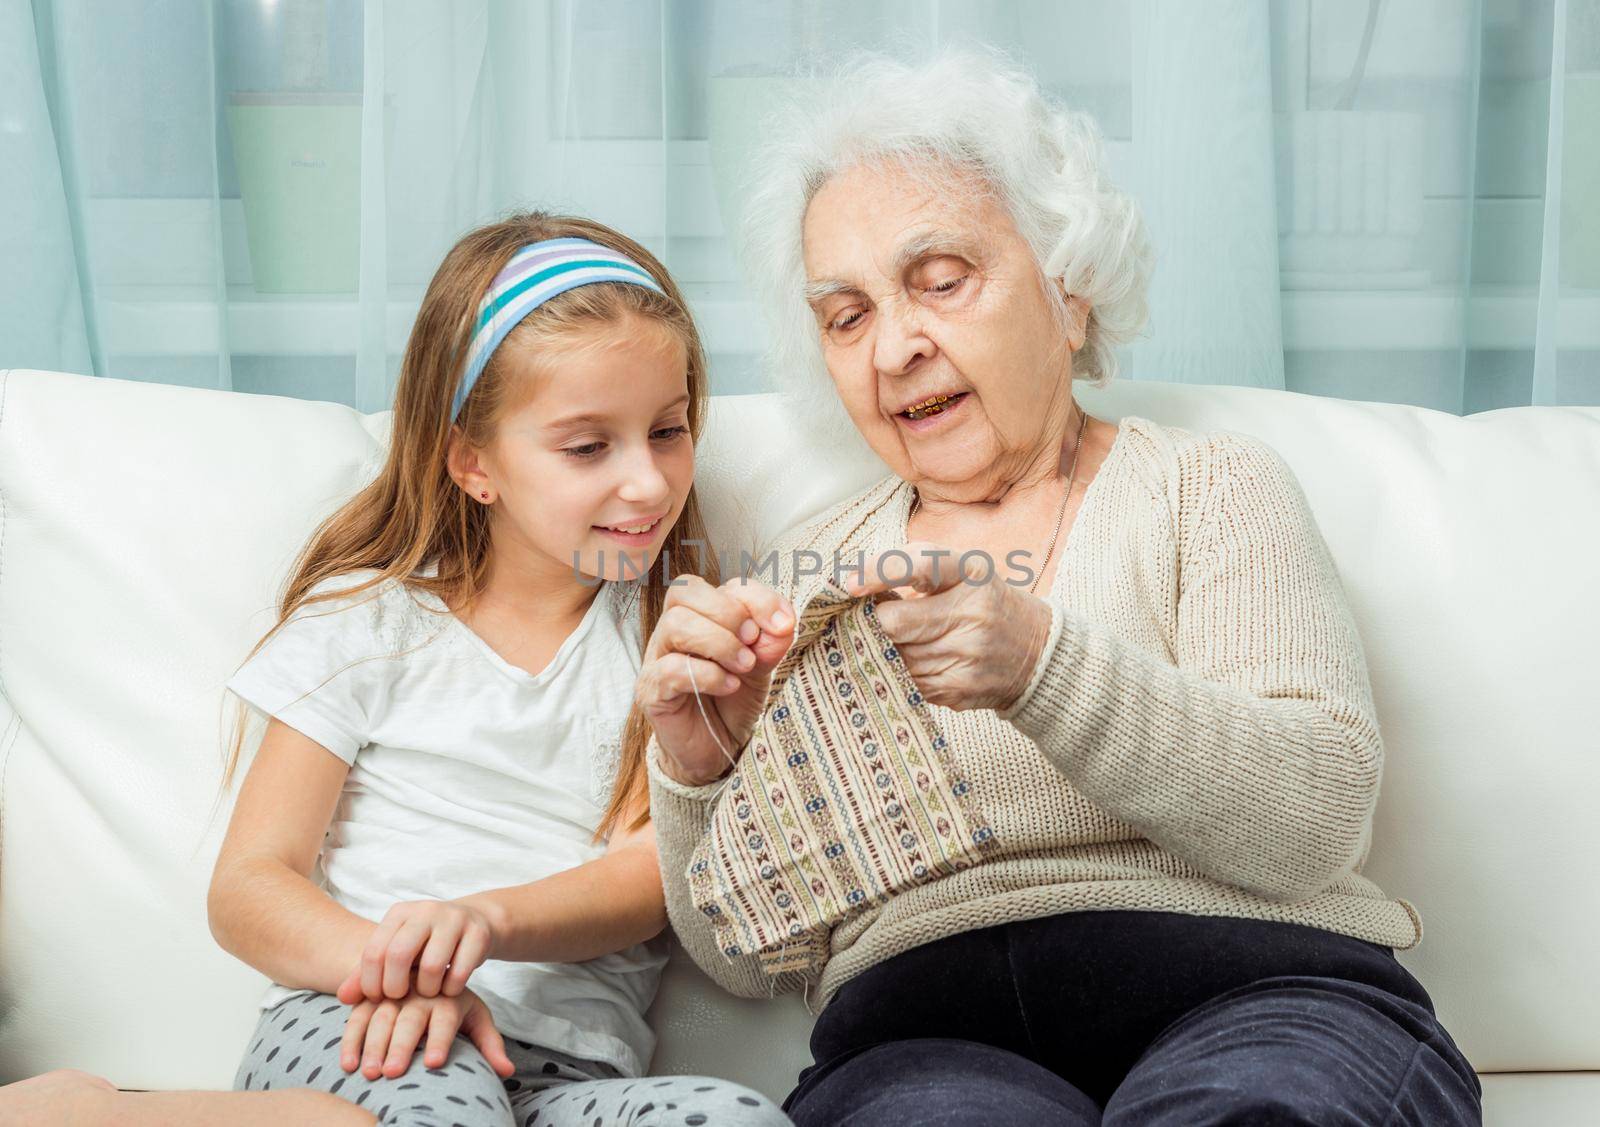 ganddaughter learning to embroider with granny by tan4ikk1